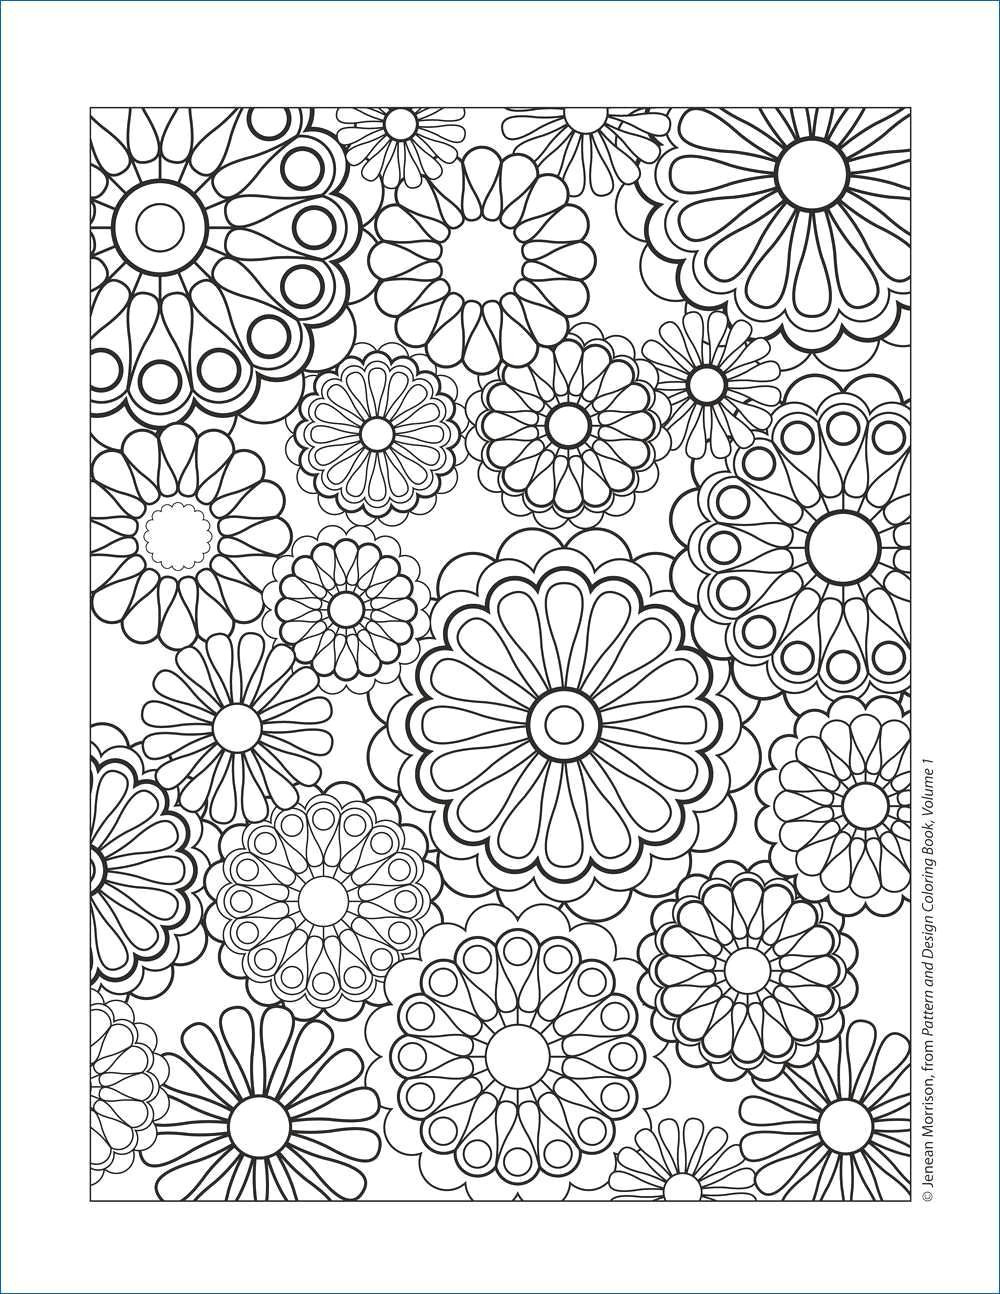 Line Drawing Flowers In Vase Make Your Own Coloring Pages From Photos Cute Cool Vases Flower Vase